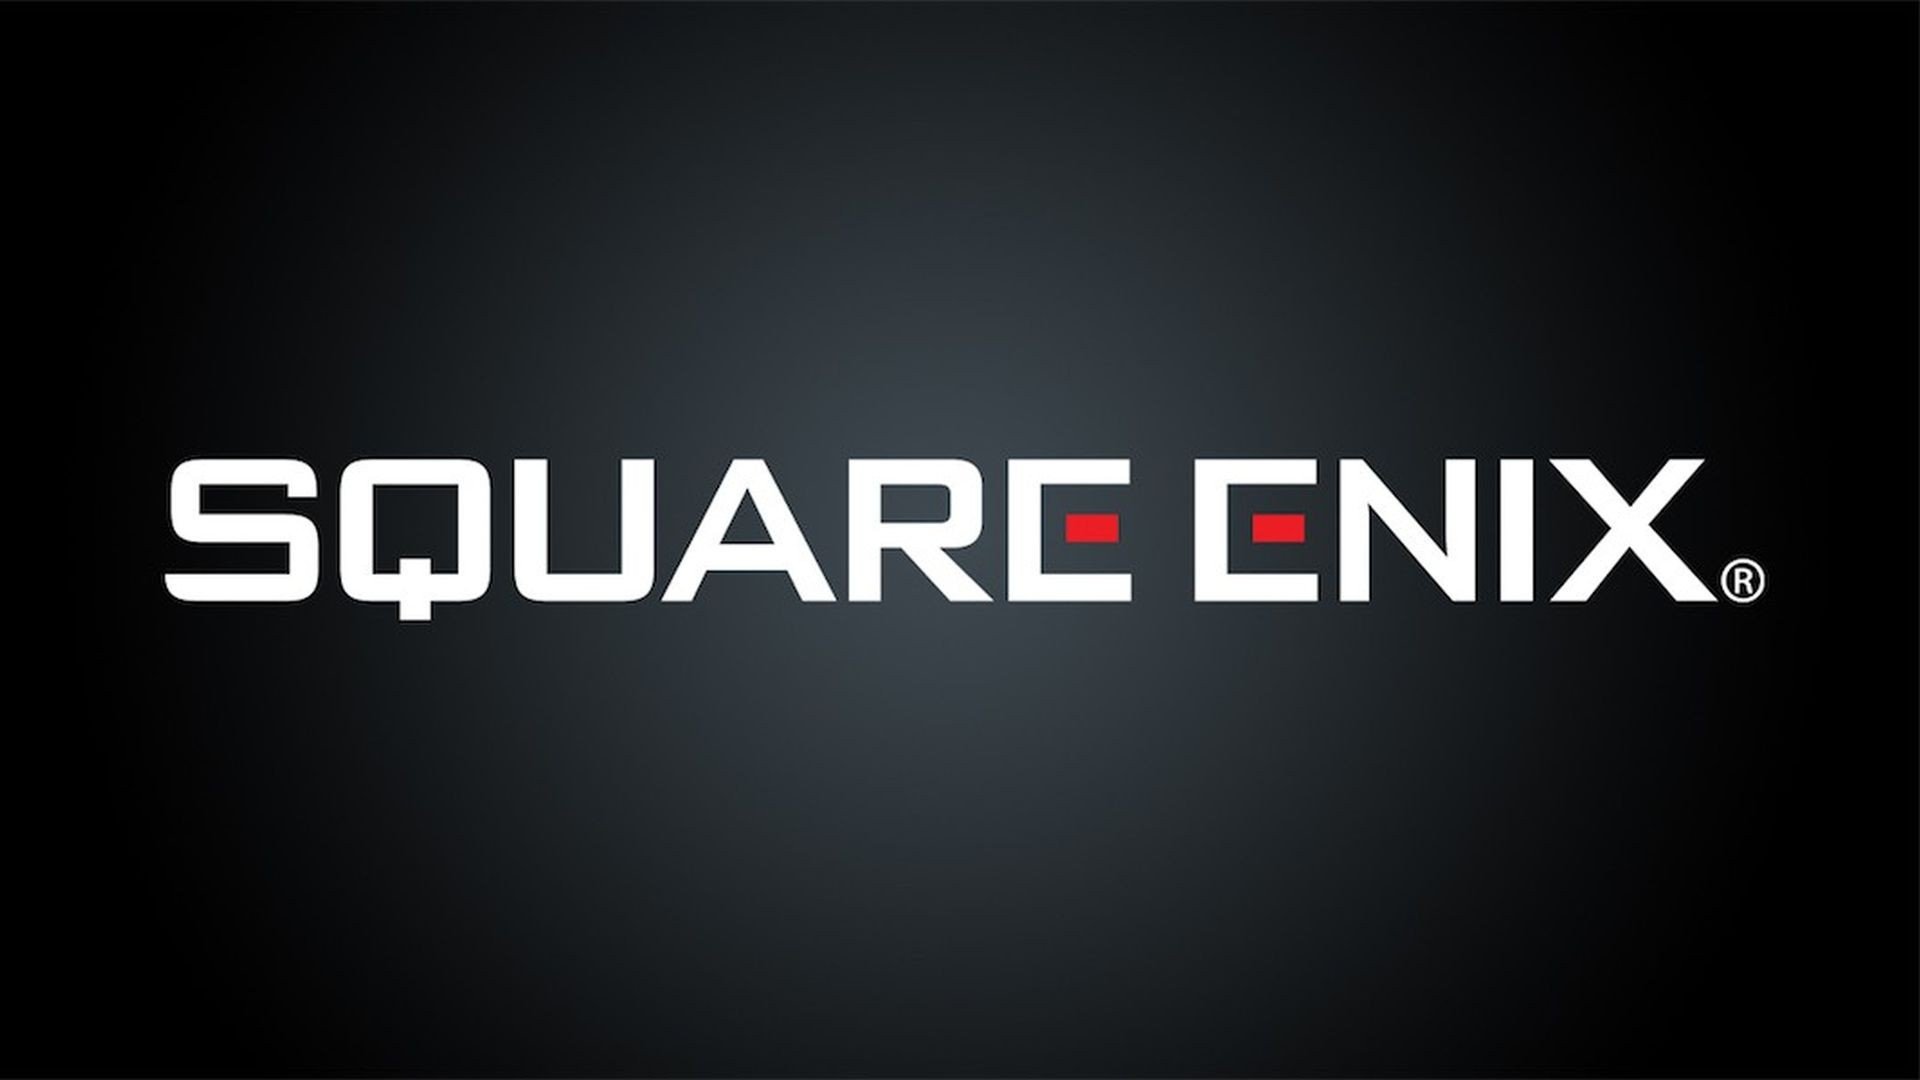 How to watch the Square Enix Live E3 2019 stream online